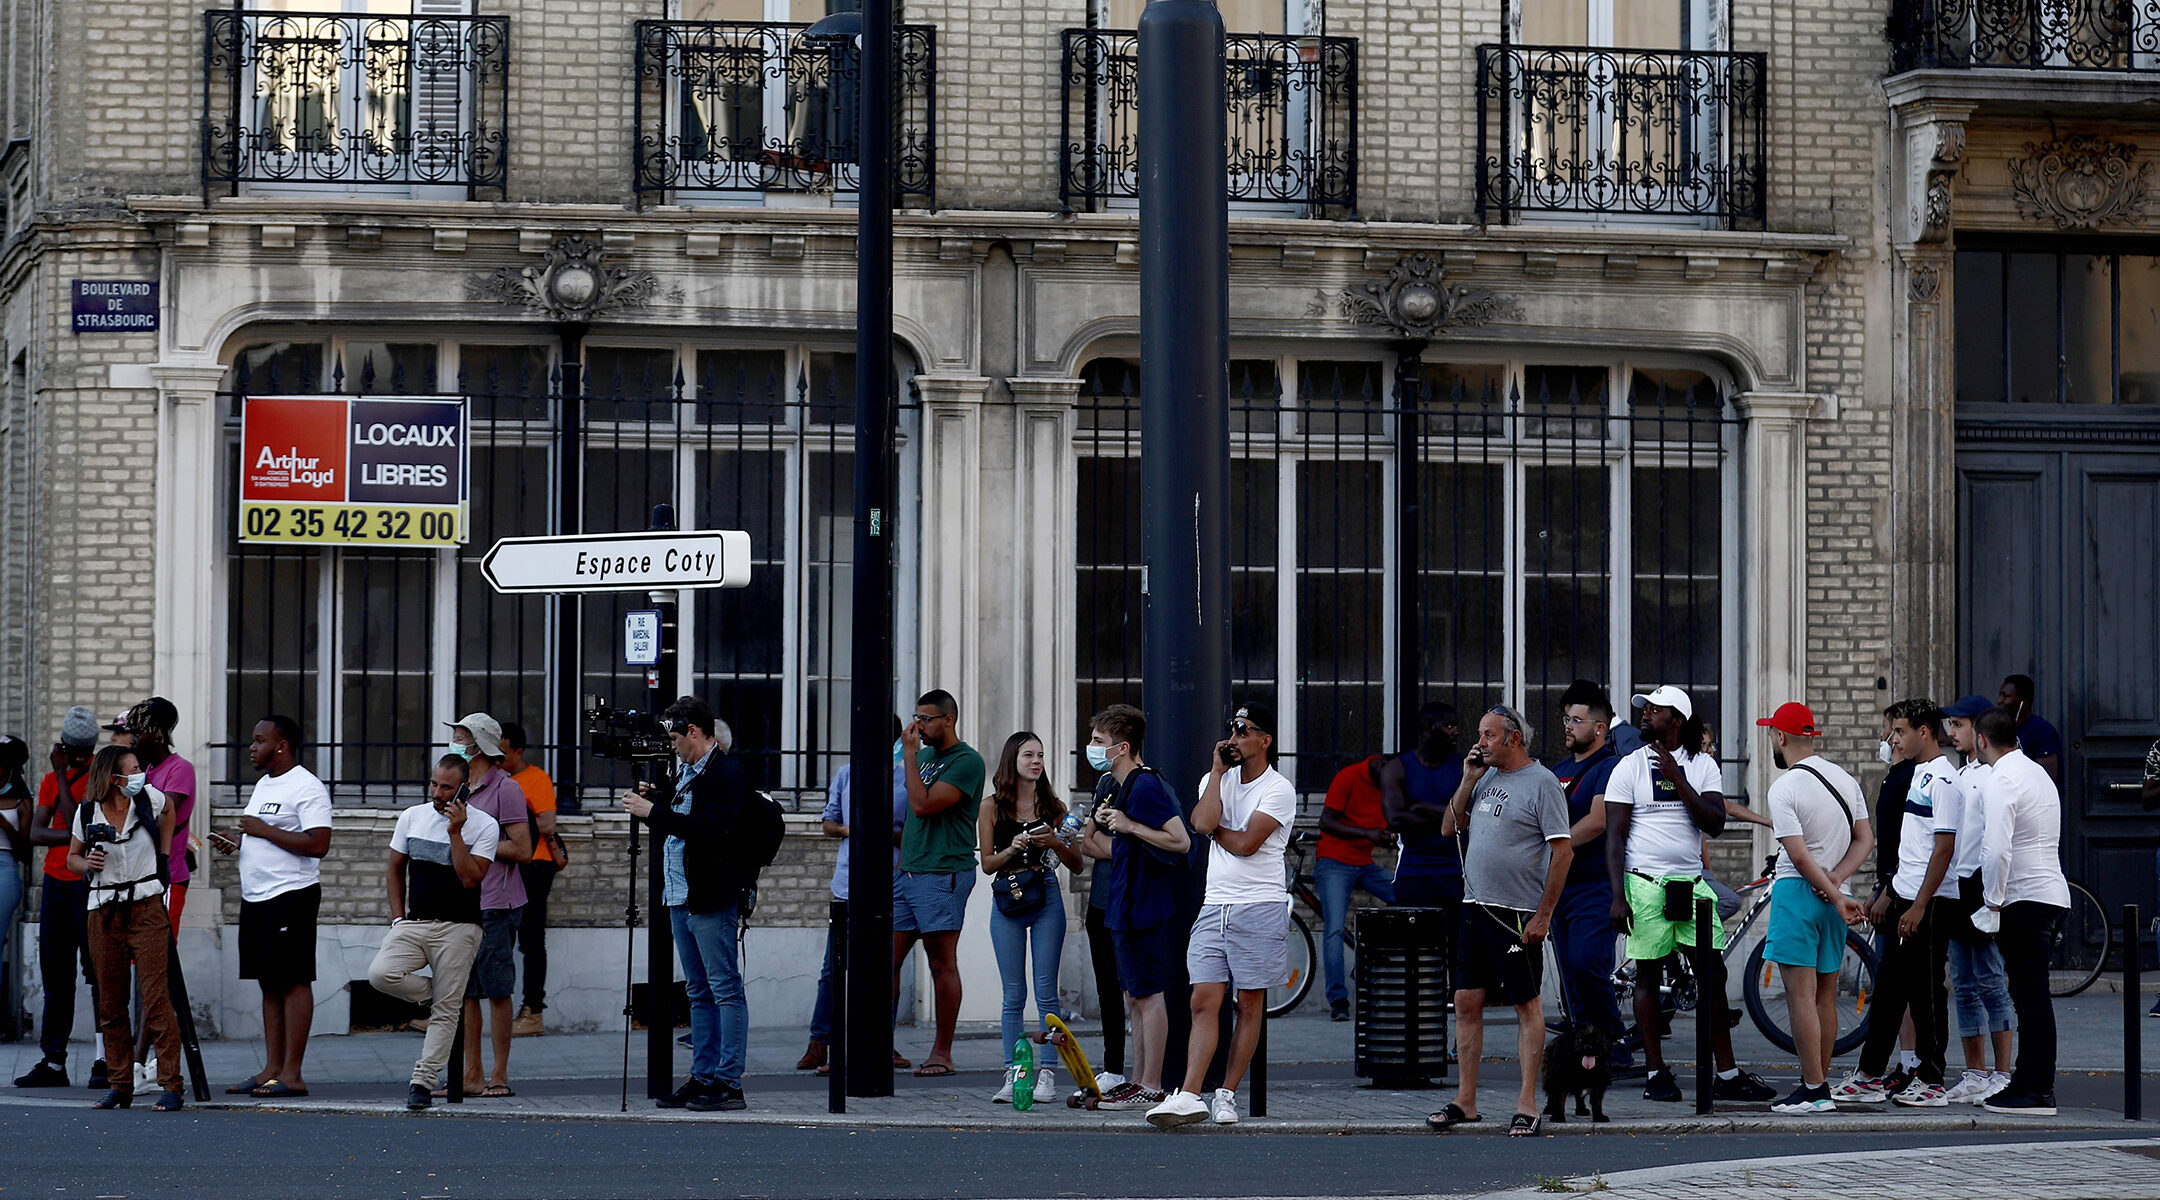 Pedestrians watch police outside a bank in Le Havre, France, where a hijacker has taken several hostages demanding the freedom of Palestinians in Israel on Aug. 7, 2020. (Sameer Al-Doumy/AFP via Getty Images)